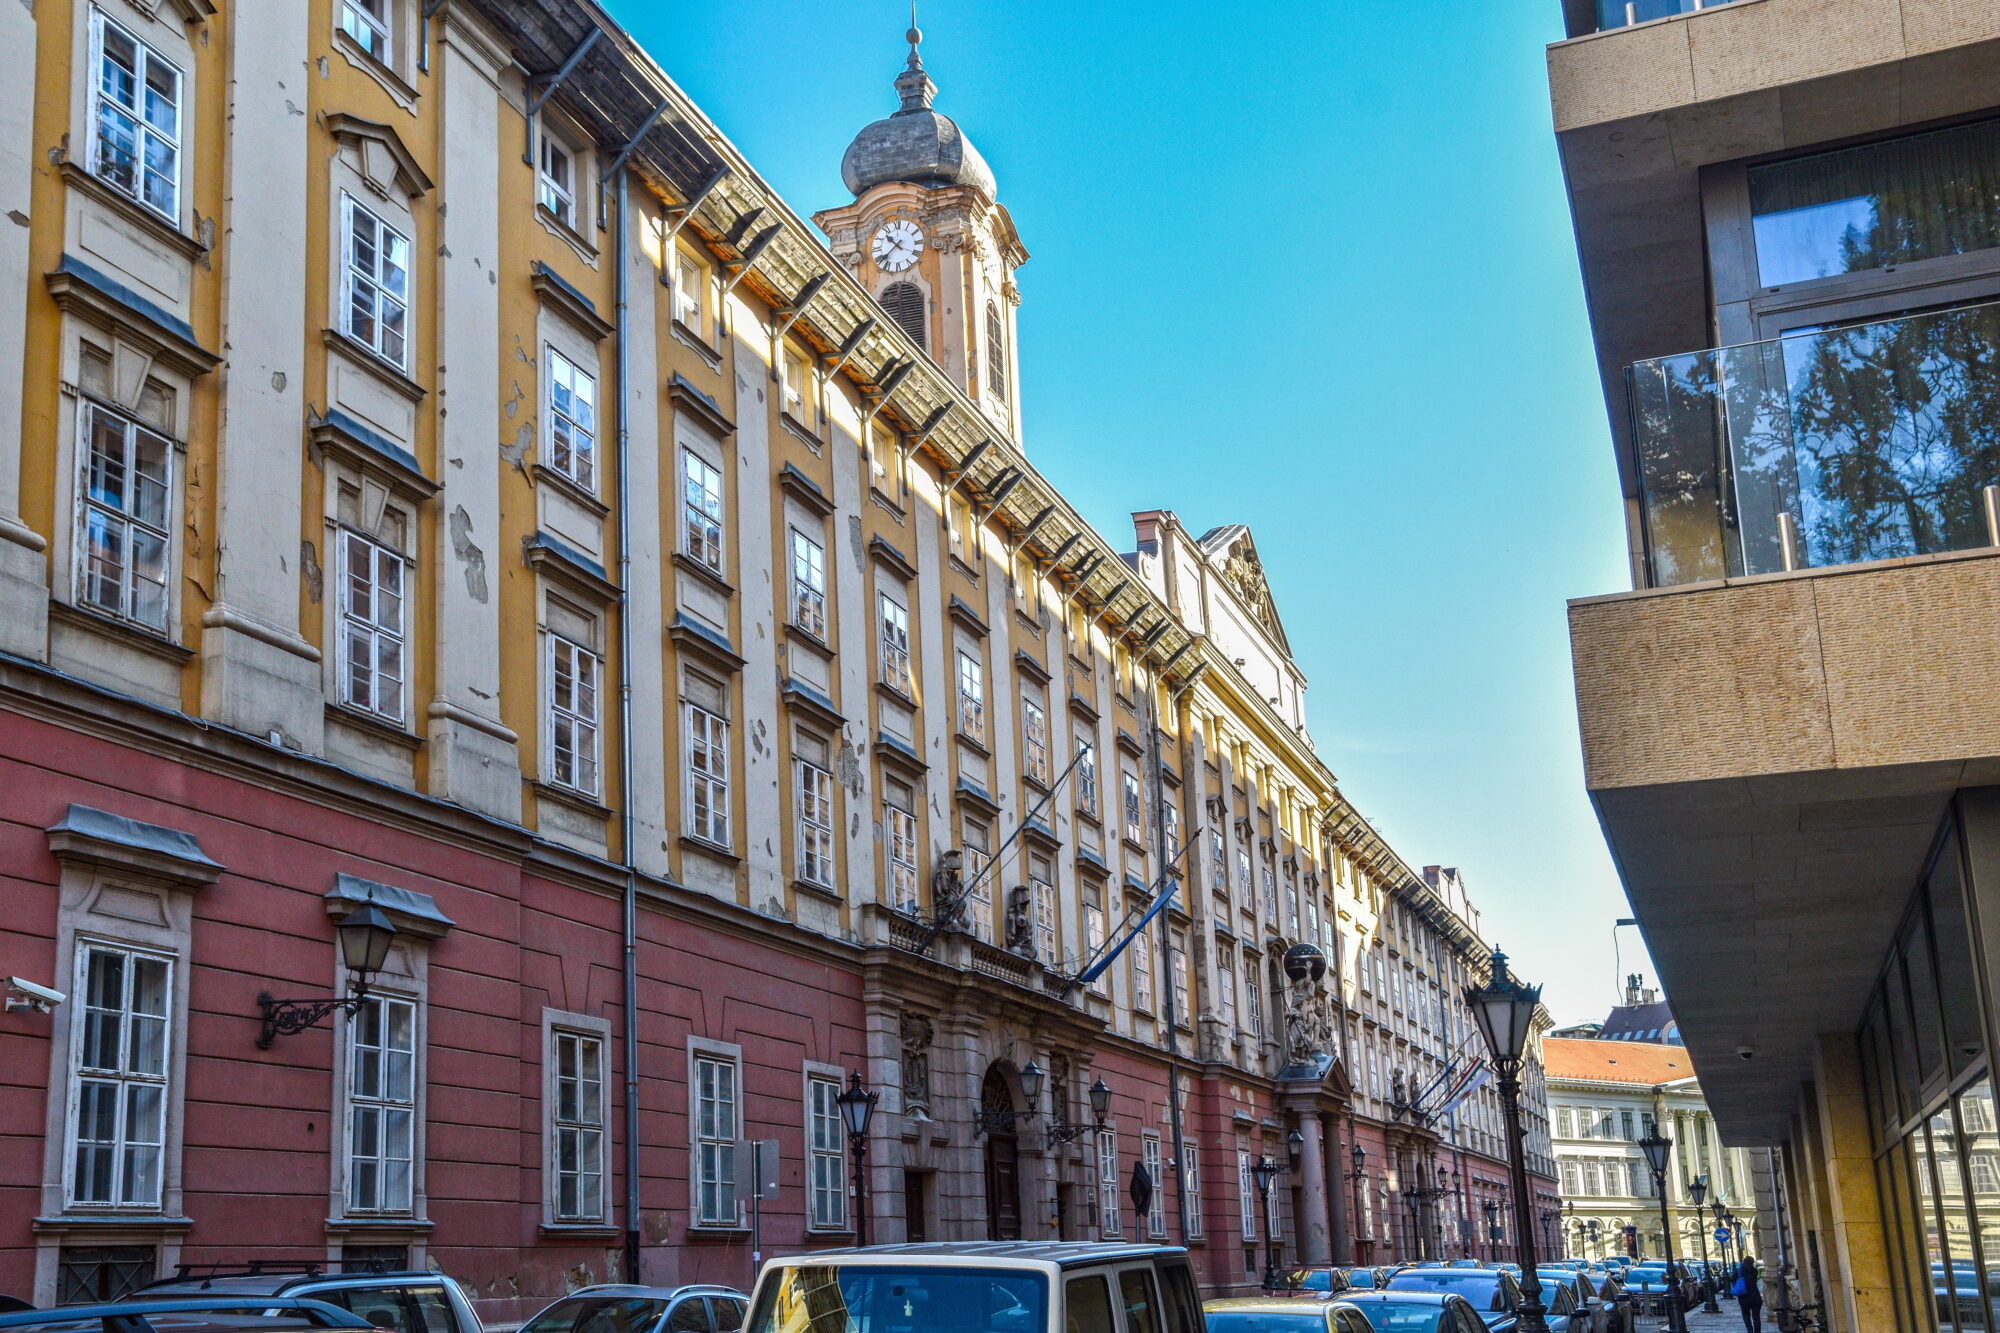 THE MAJORITY OF BUDAPEST RESIDENTS CONSIDER GERGELY KARÁCSONY TO BE RESPONSIBLE FOR THE CITY HALL AFFAIR